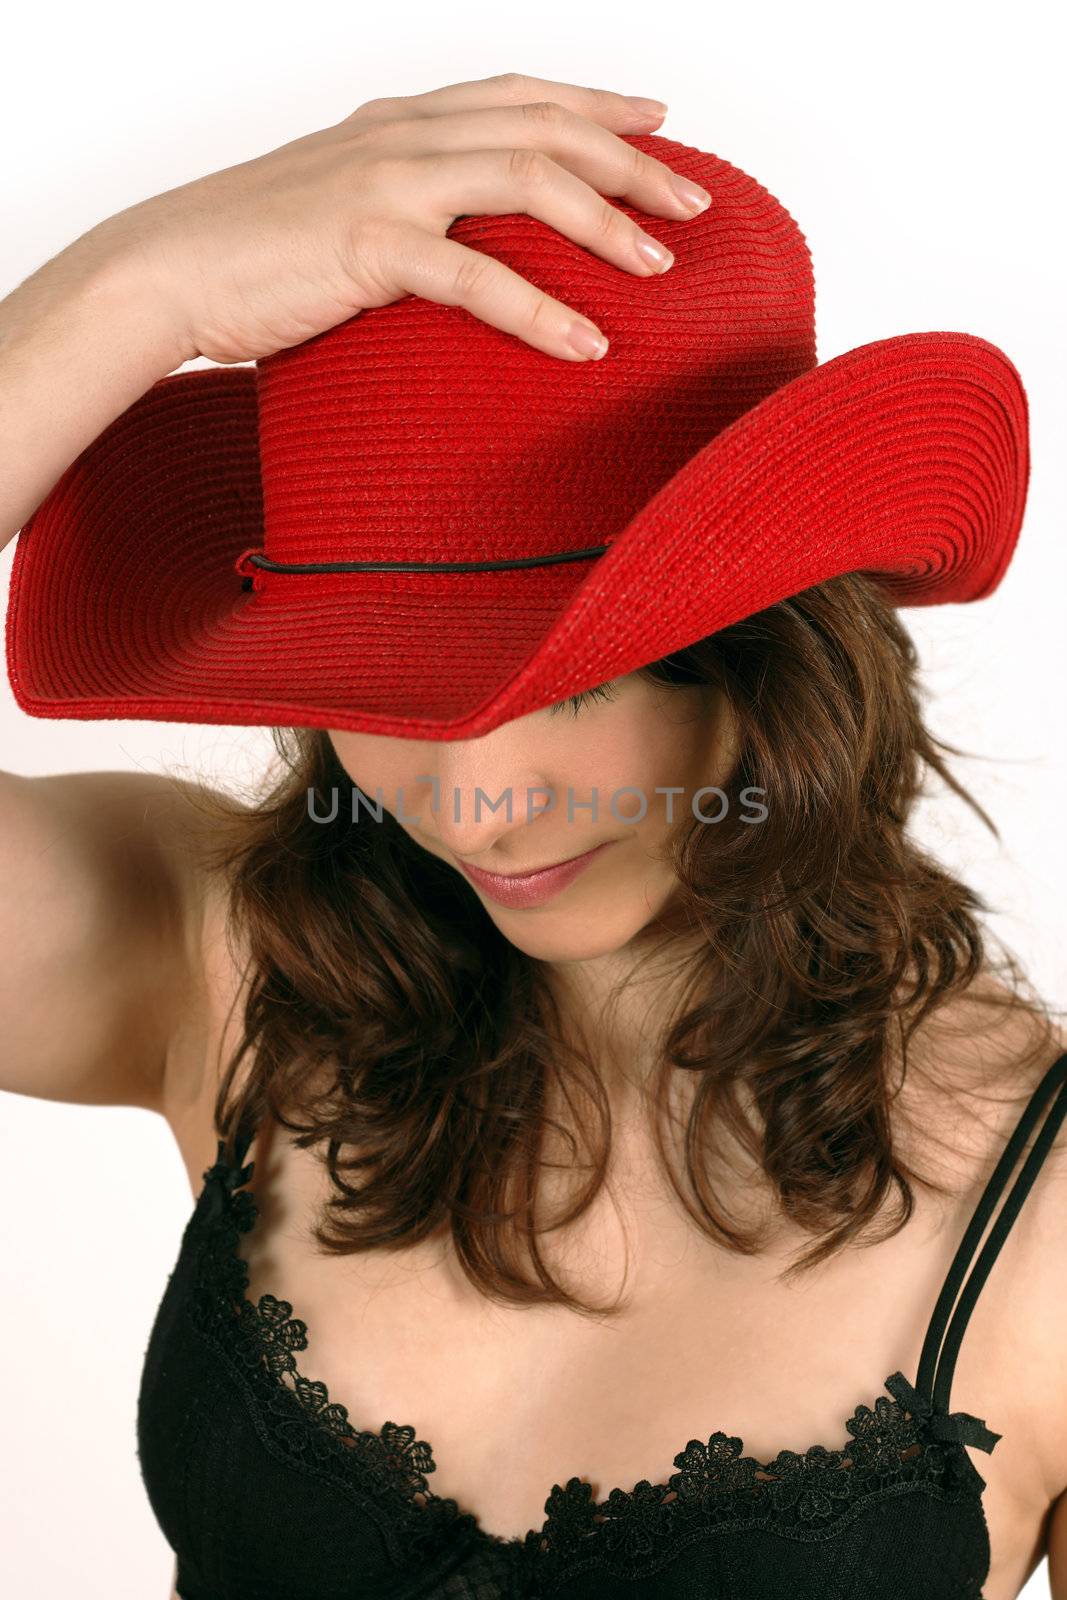 Image of a beautiful young woman putting a red cowboy hat on her head.
